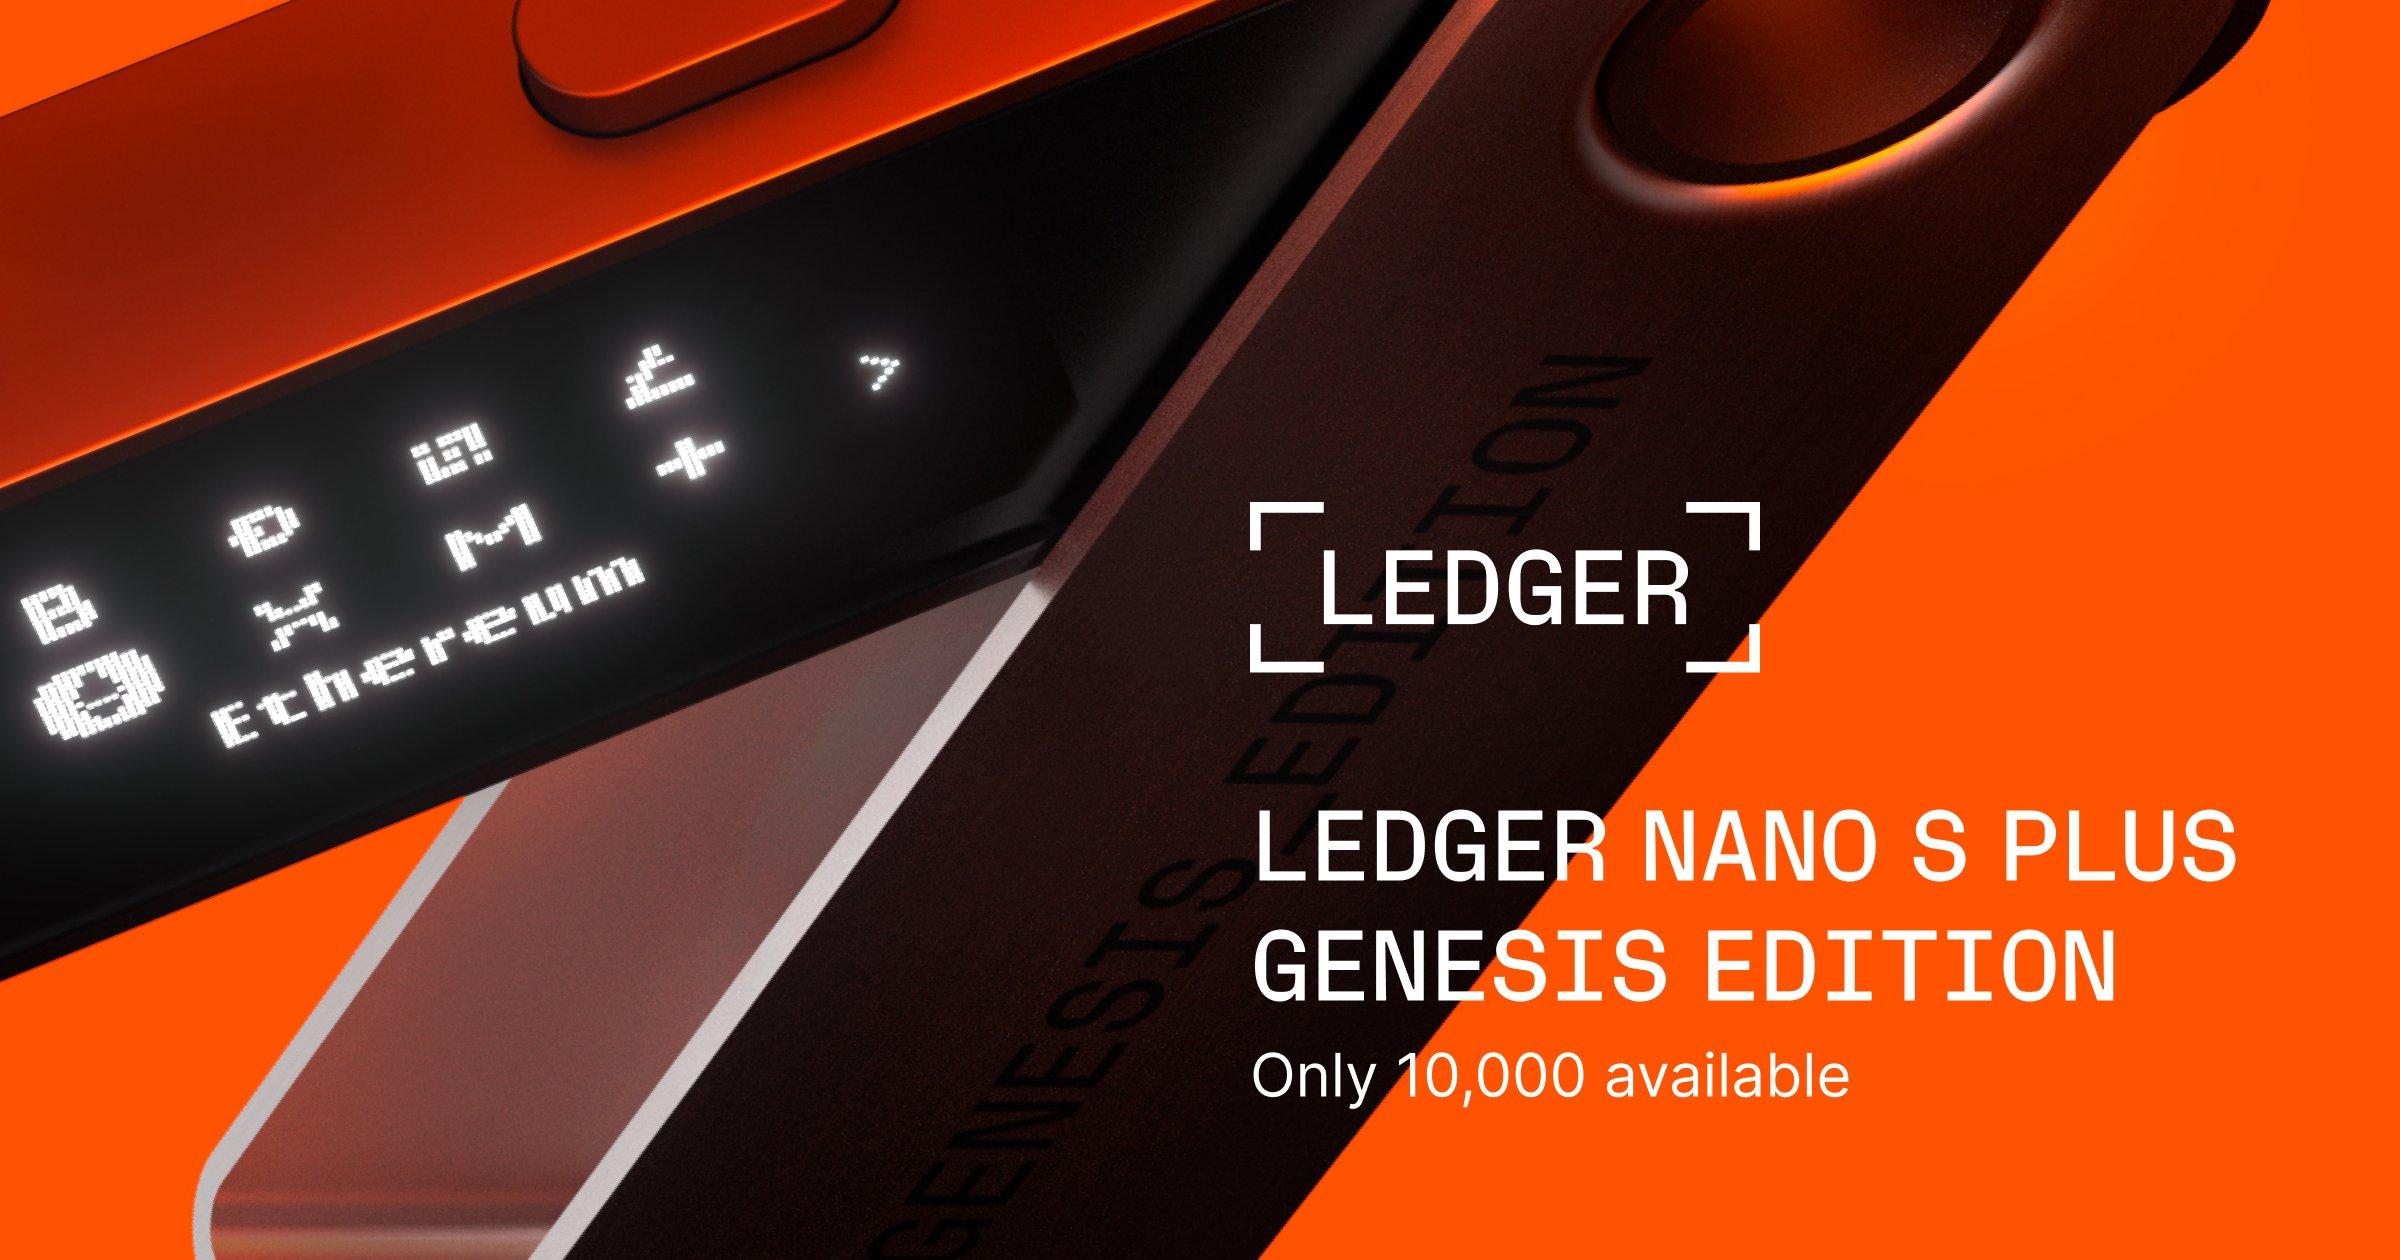 The Limited edition Ledger x POAP Nano S hardware wallet